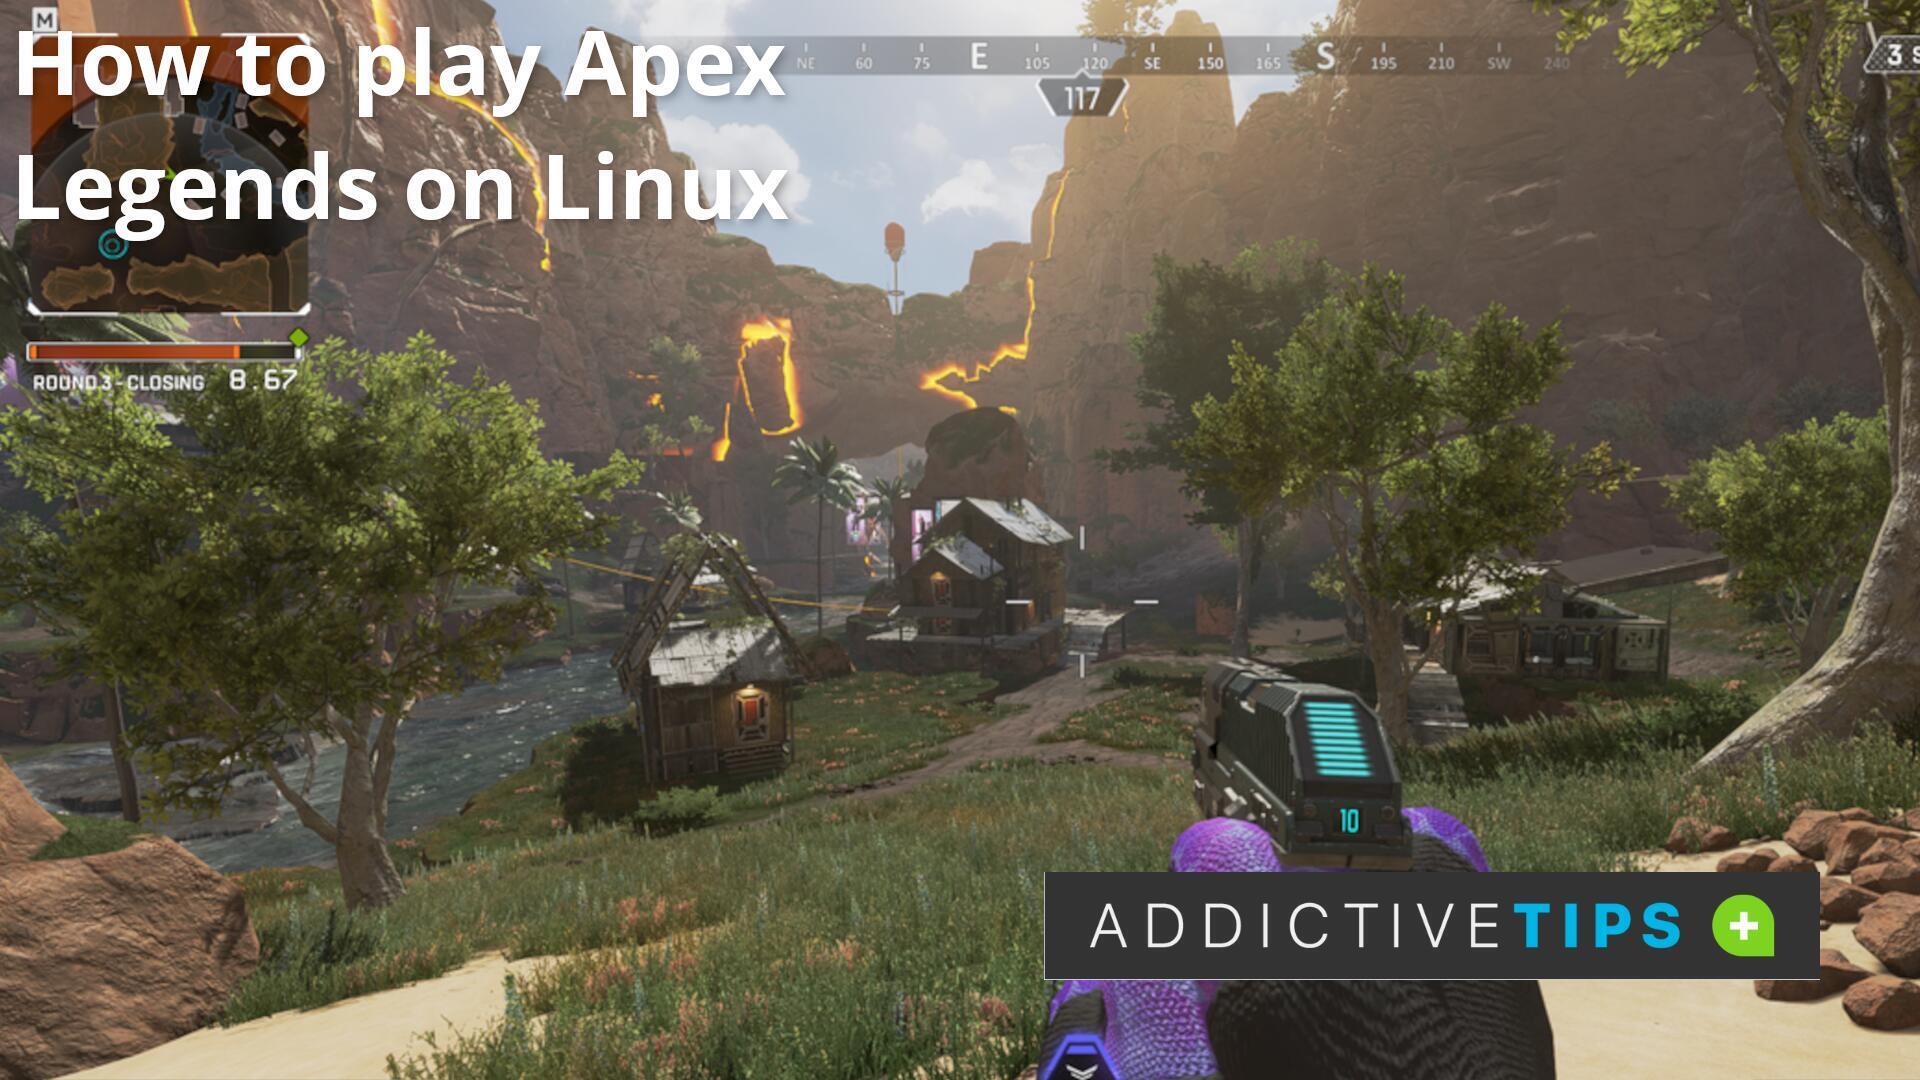 Apex Legends finally playable on Linux: How to download and